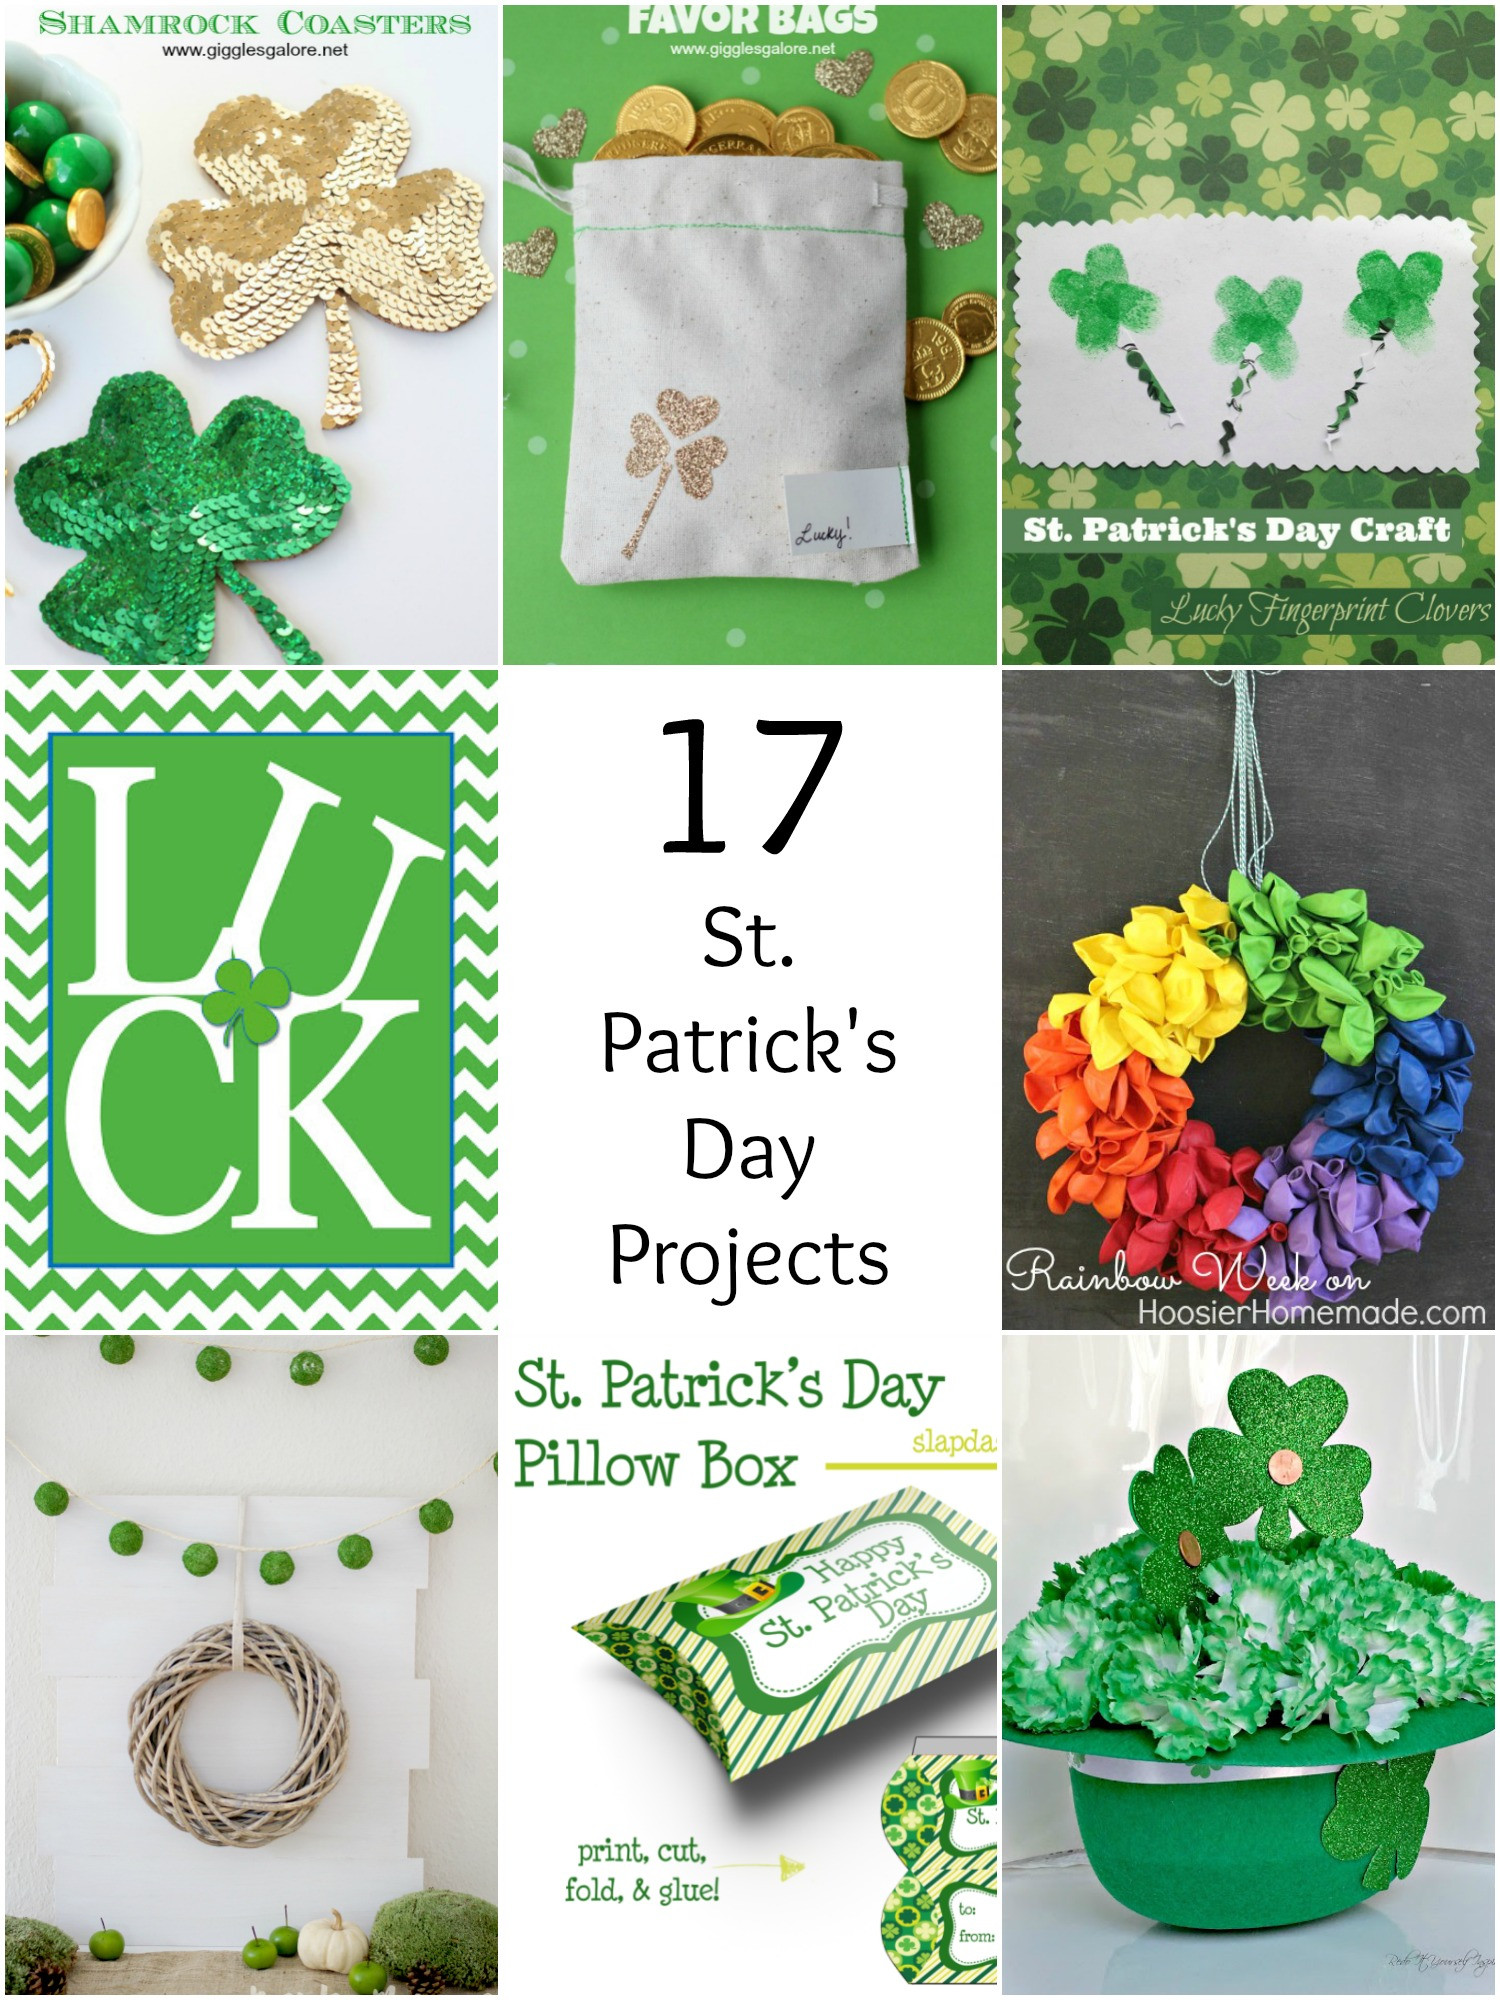 St Patrick's Day Crafts Pinterest
 So Creative 17 Fun St Patrick s Day Projects